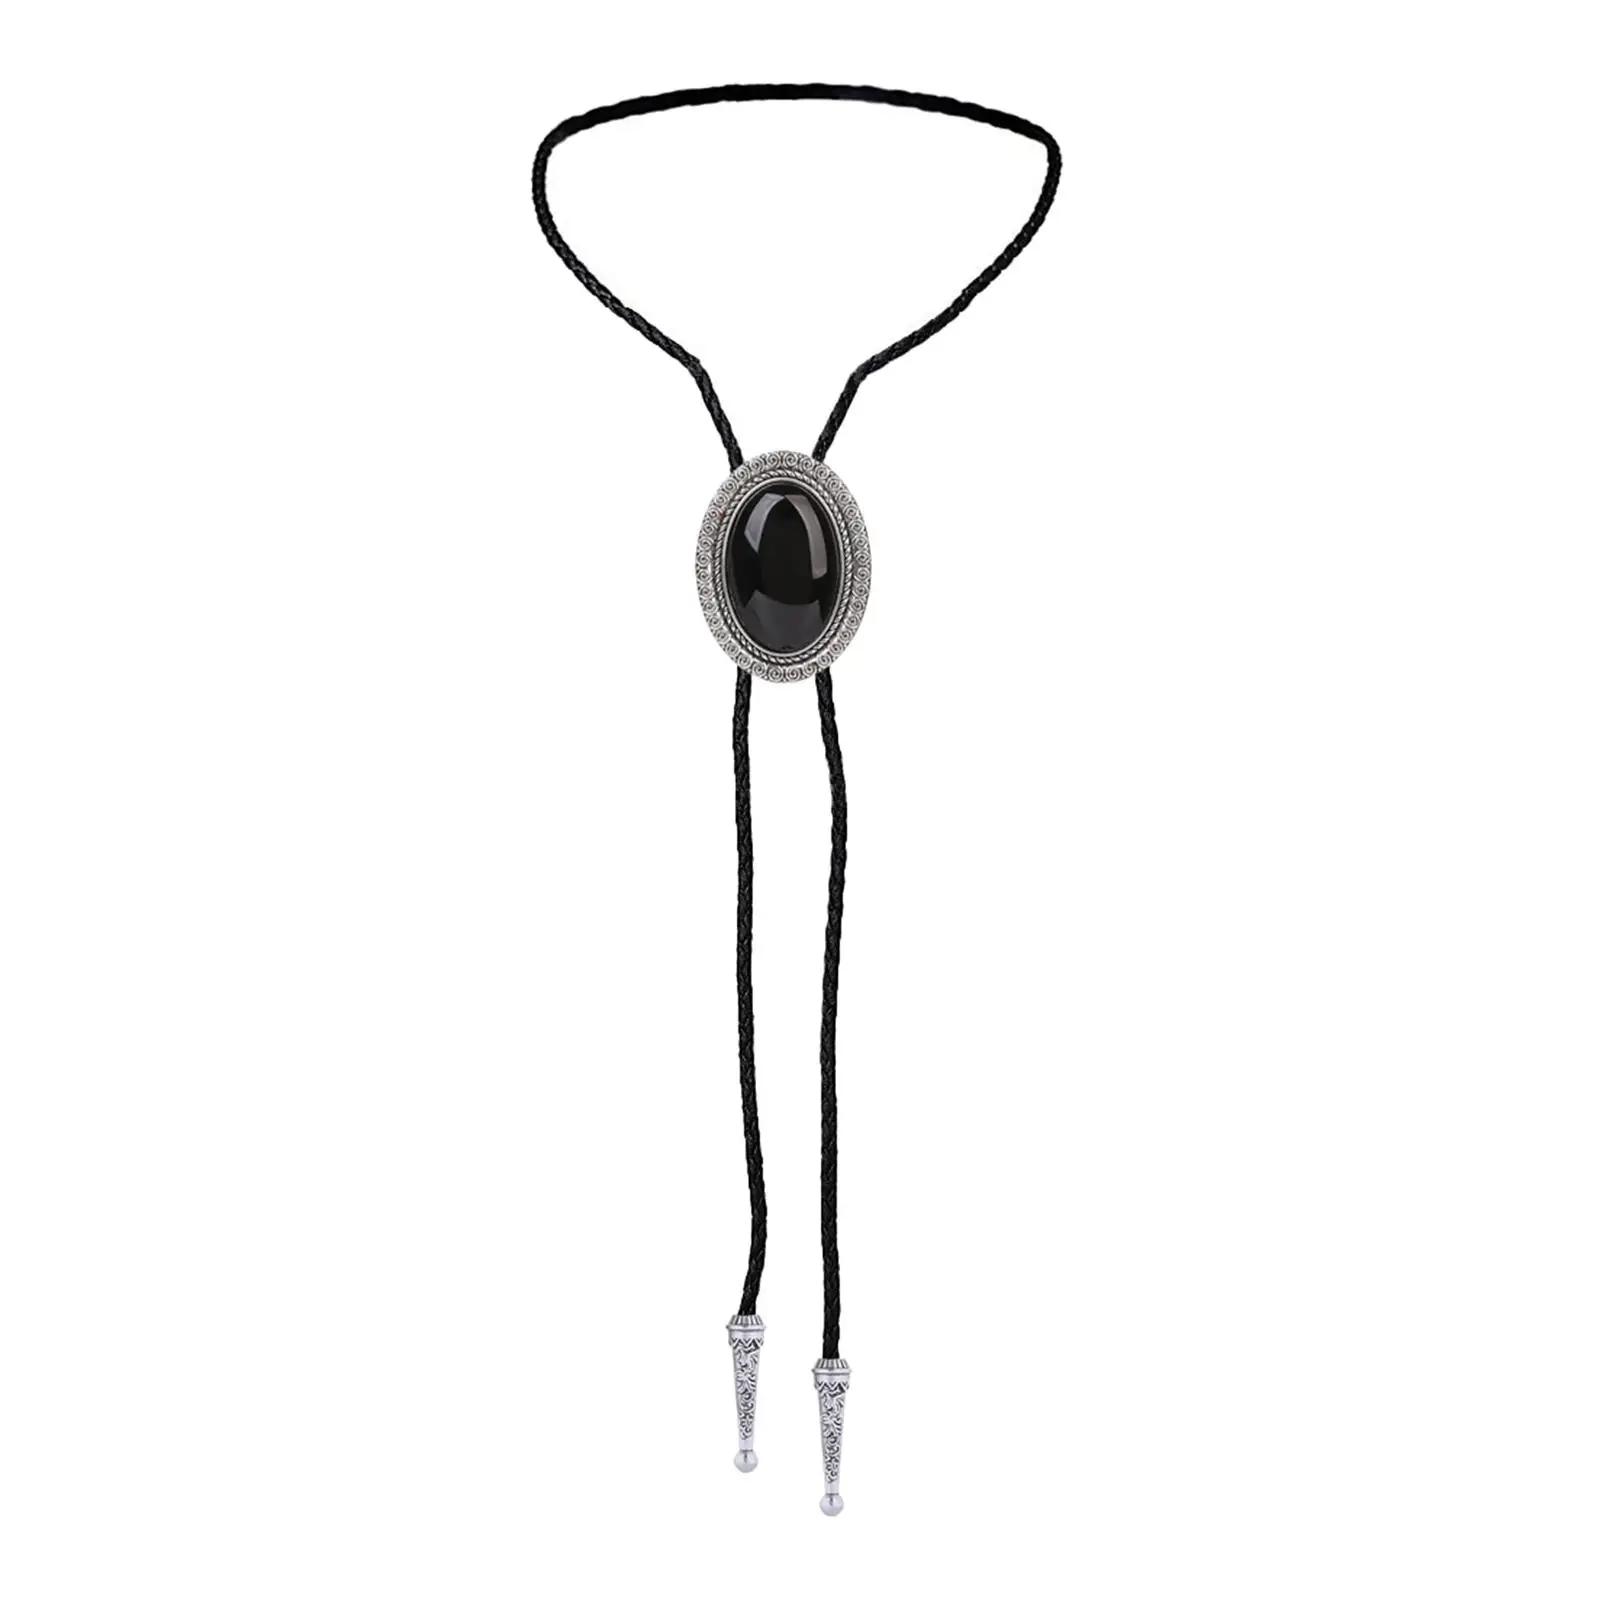 Bolo Tie for Men Western Shirt Chain Neck Rope PU Leather Rope